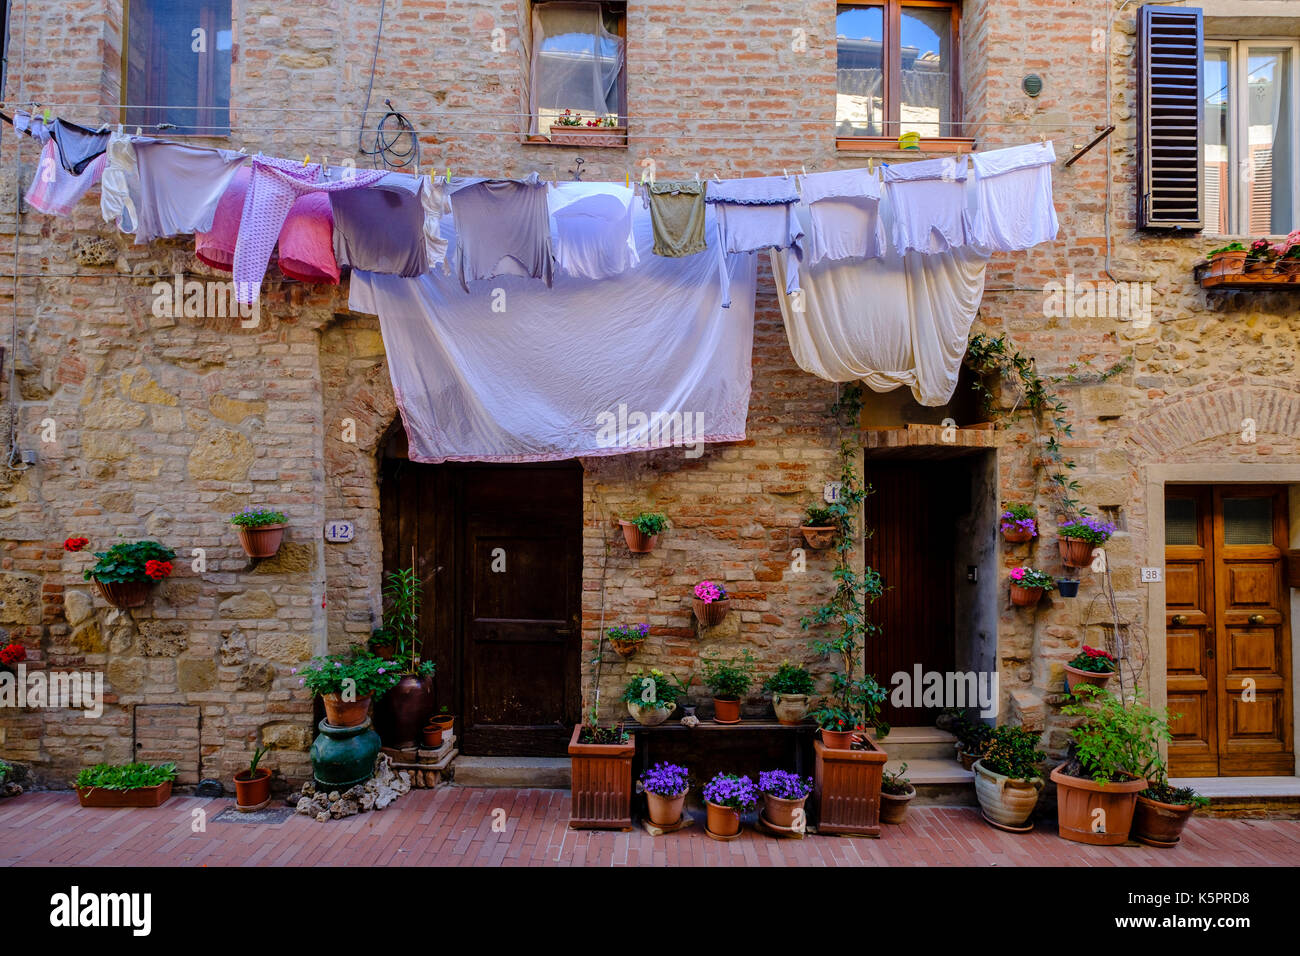 Laundry is put to dry at the facade of an old house in the medieval town Stock Photo